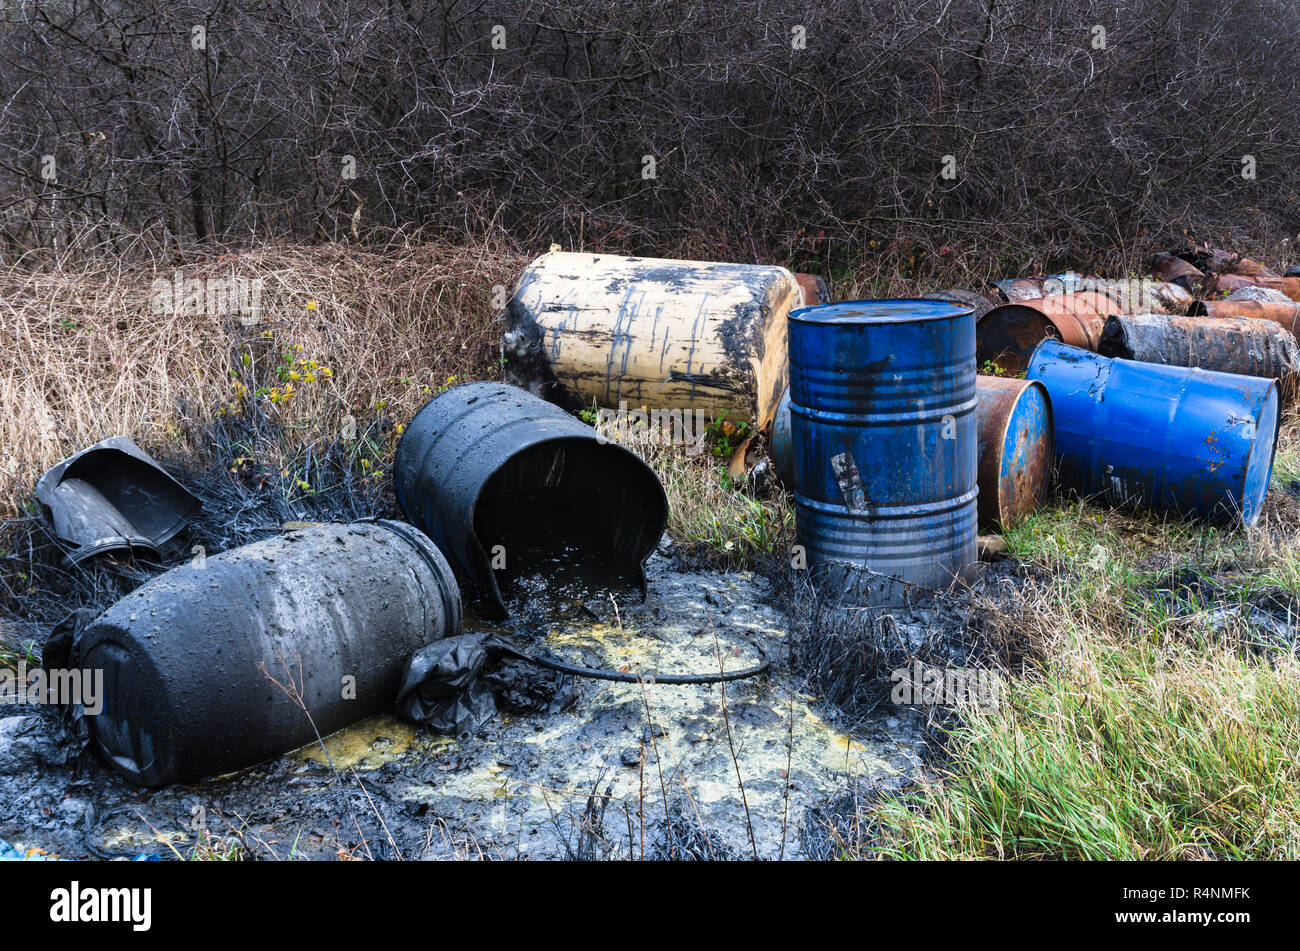 Barrels of toxic waste in nature, pollution of the environment Stock Photo  - Alamy